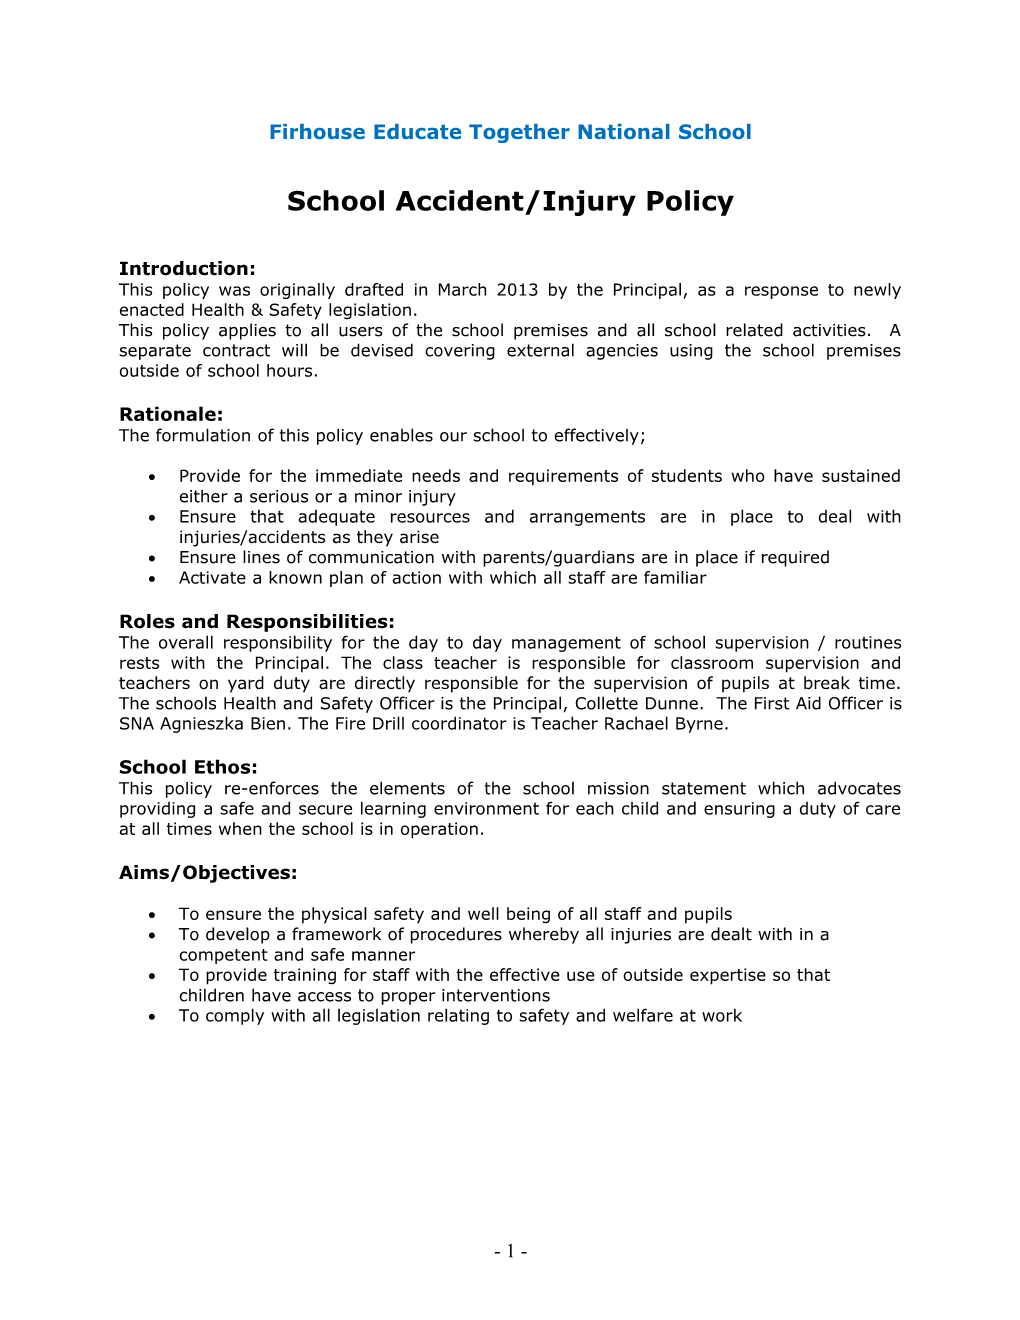 School Accident/ Injury Policy